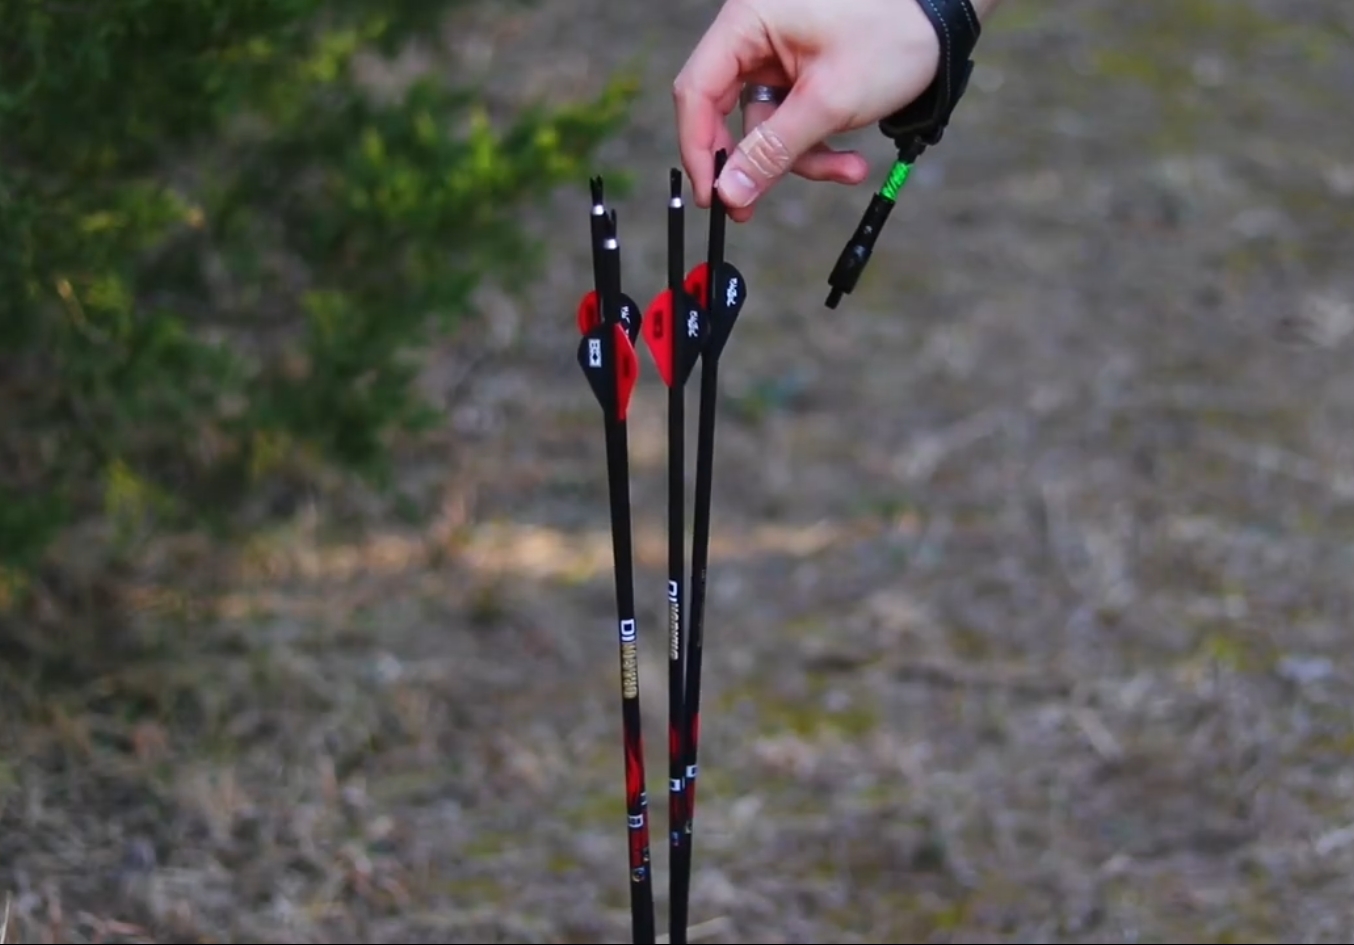 Dragon 10 Compound Bow Arrows Review